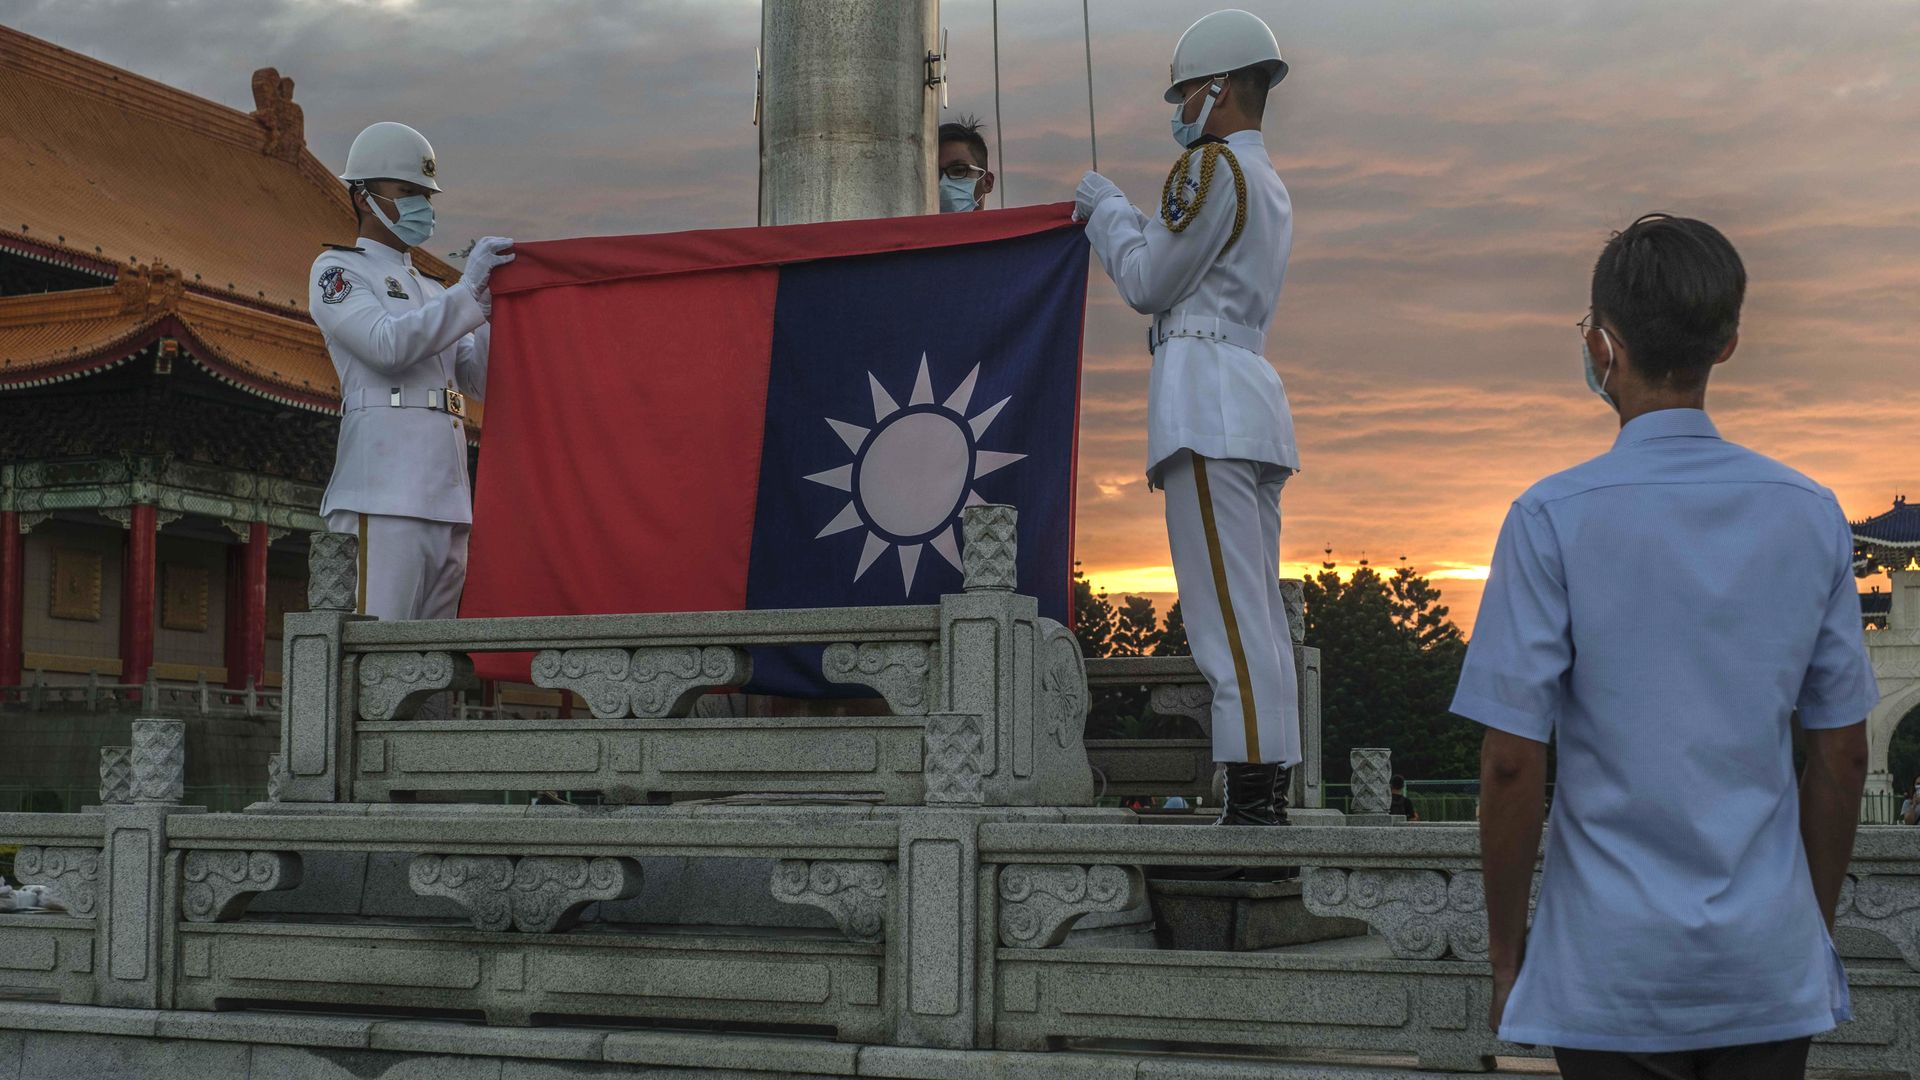 Soldiers lower the Taiwanese flag during a ceremony at the Chiang Kai-shek Memorial Hall in Taipei, Taiwan. on Thursday, Aug. 4.